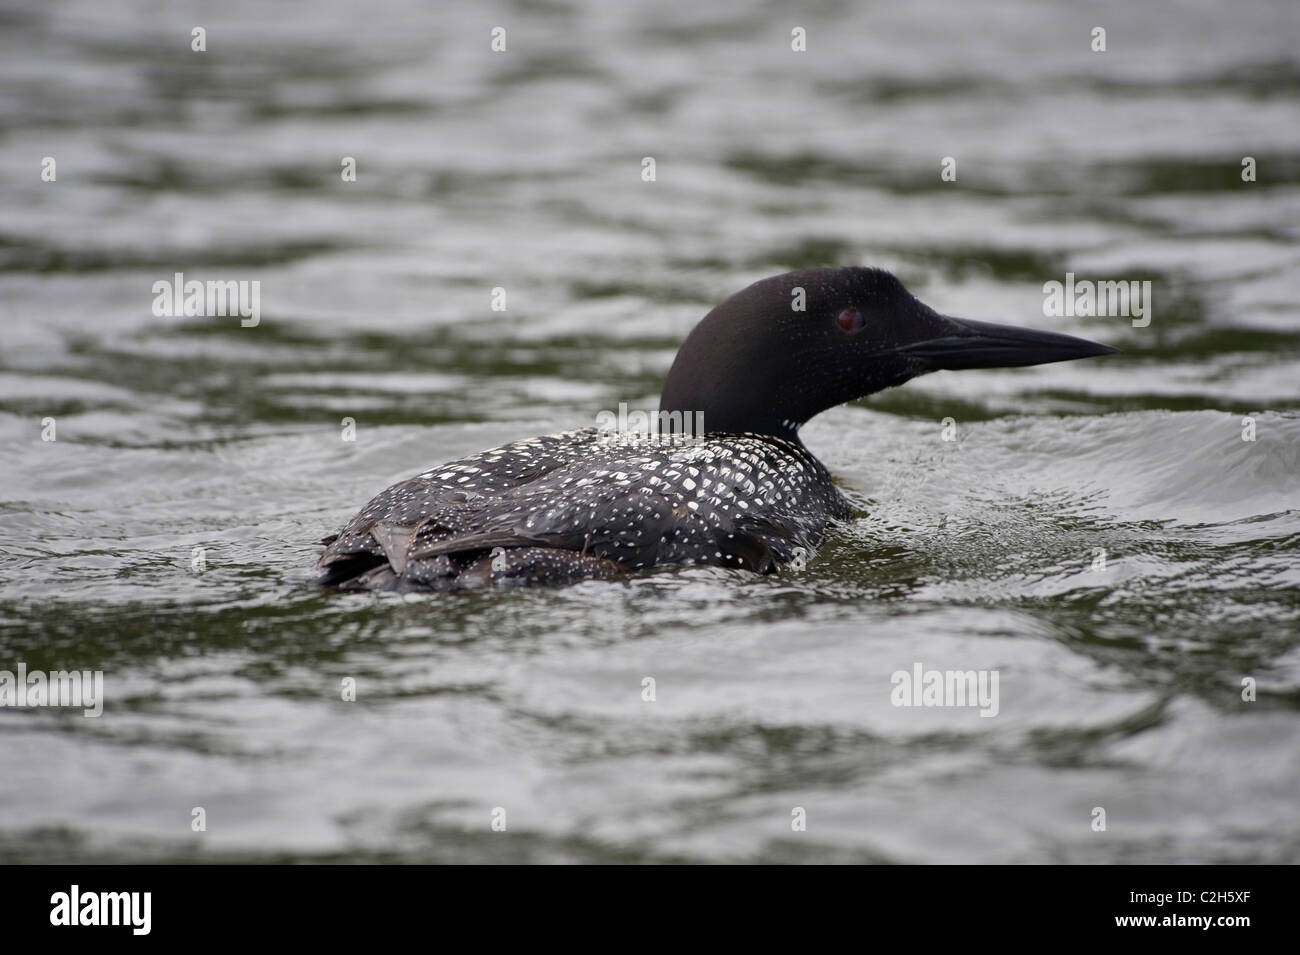 Lake Of The Woods, Ontario, Canada; Duck Swimming In Lake Stock Photo